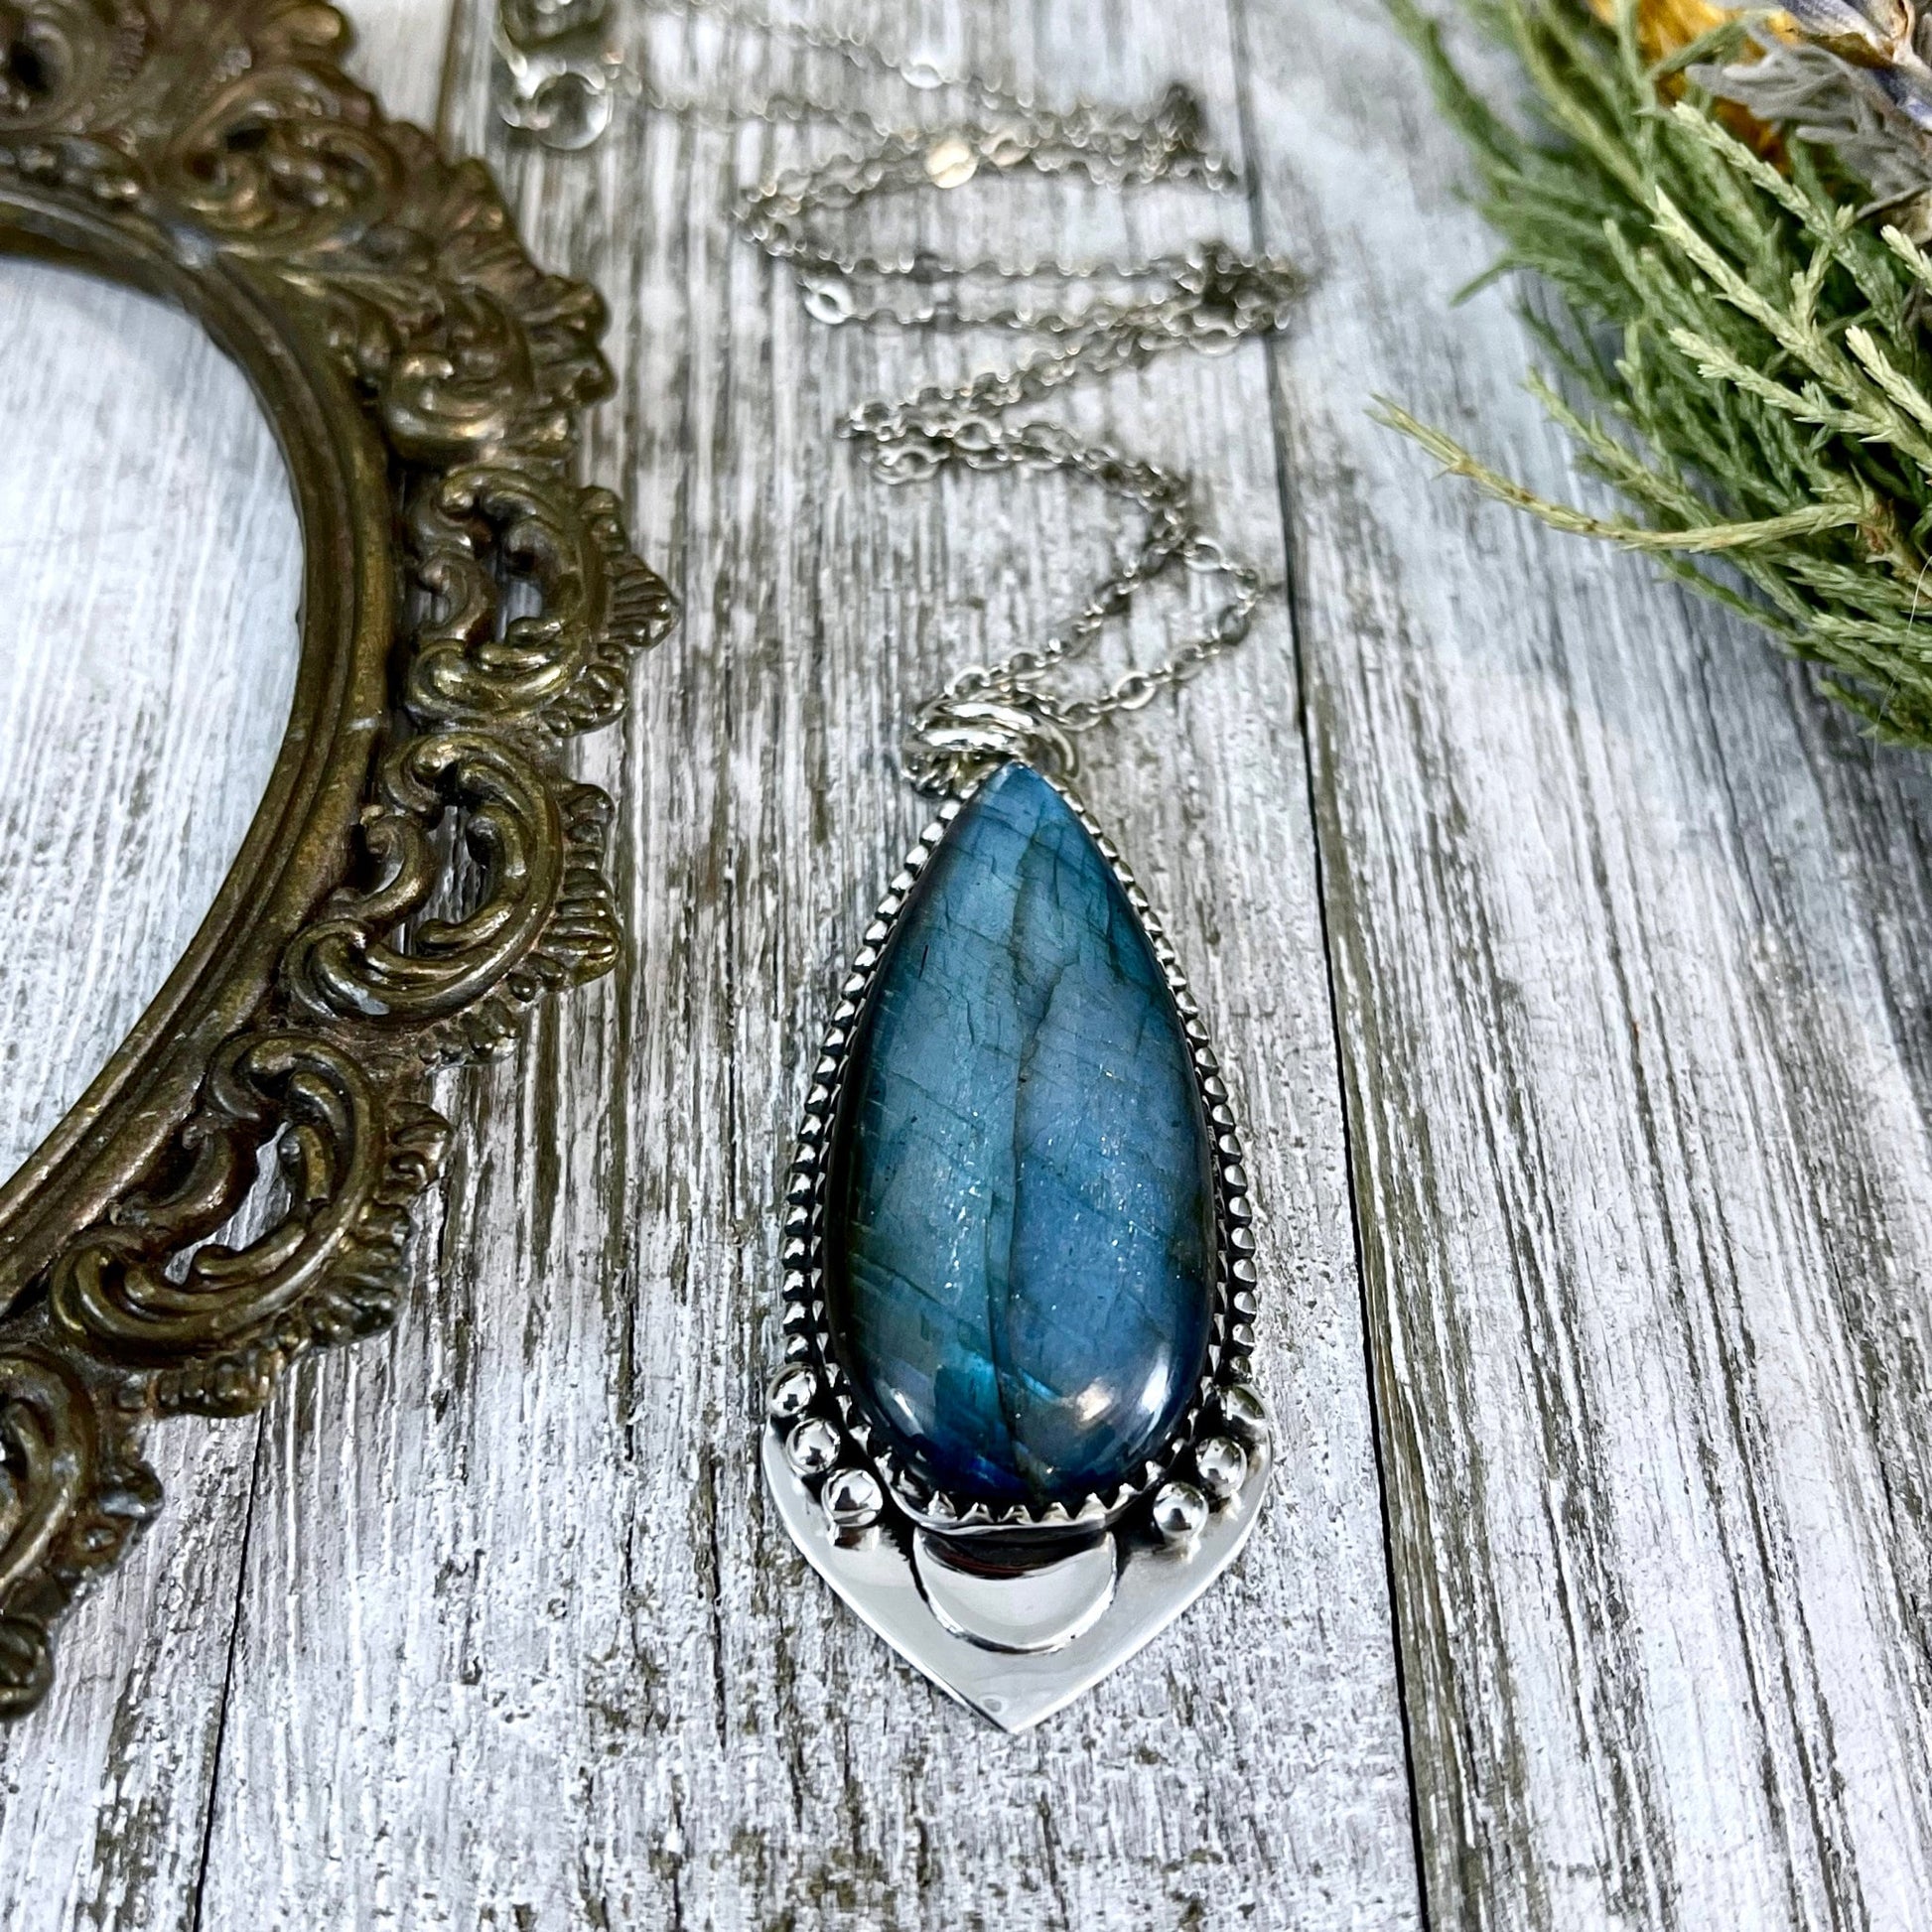 Midnight Moon Necklace - Labradorite Crystal Teardrop Necklace in Sterling Silver -Designed by FOXLARK Collection/ Witchy Crystal Necklace